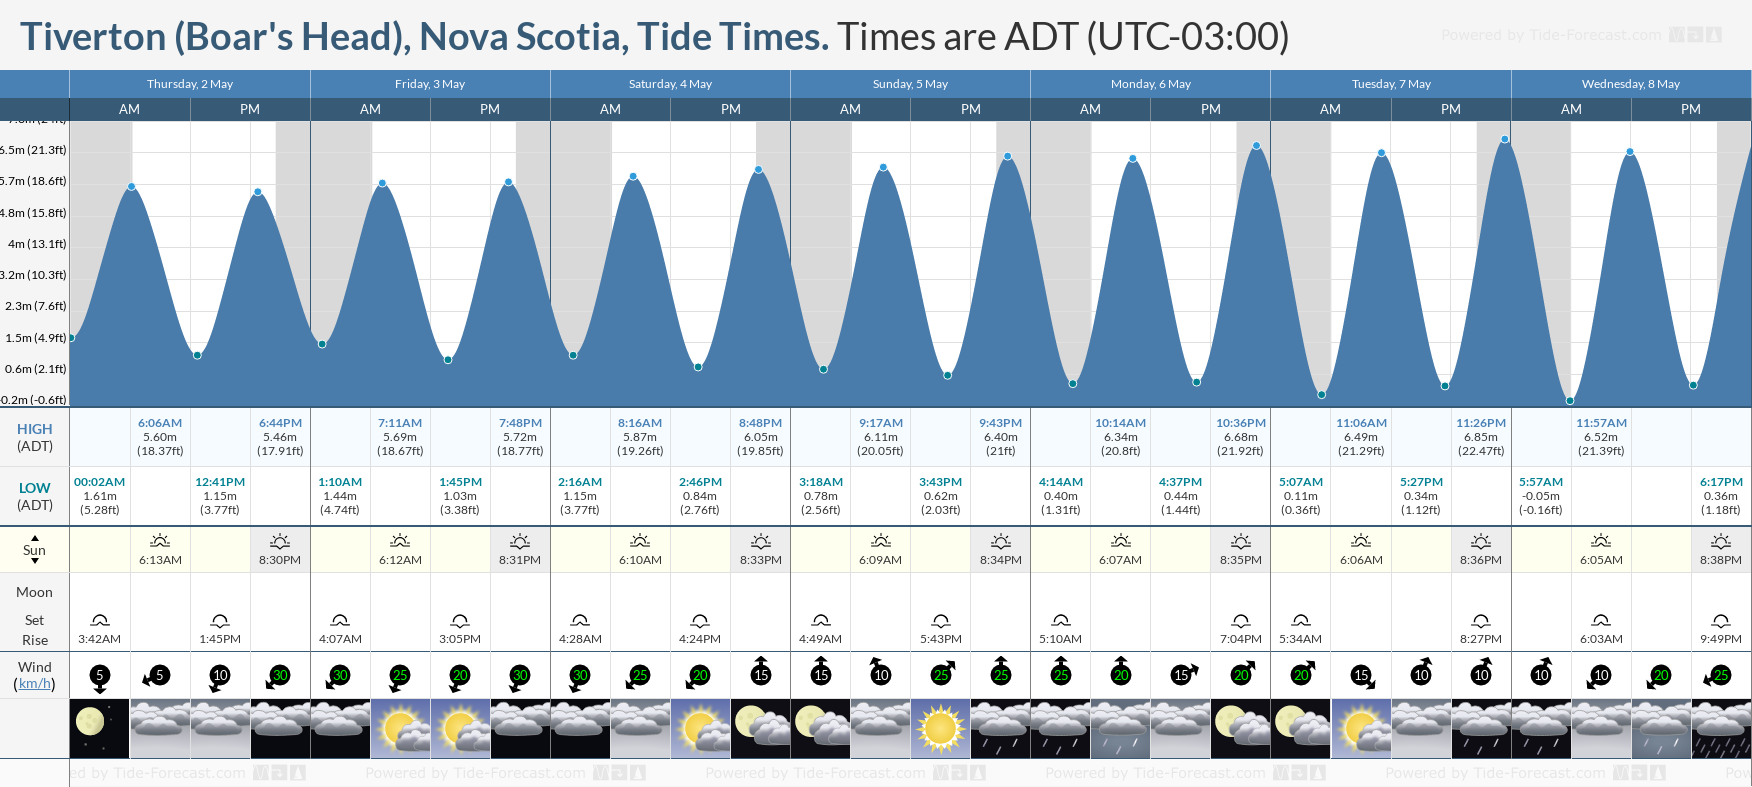 Tiverton (Boar's Head), Nova Scotia Tide Chart including high and low tide tide times for the next 7 days